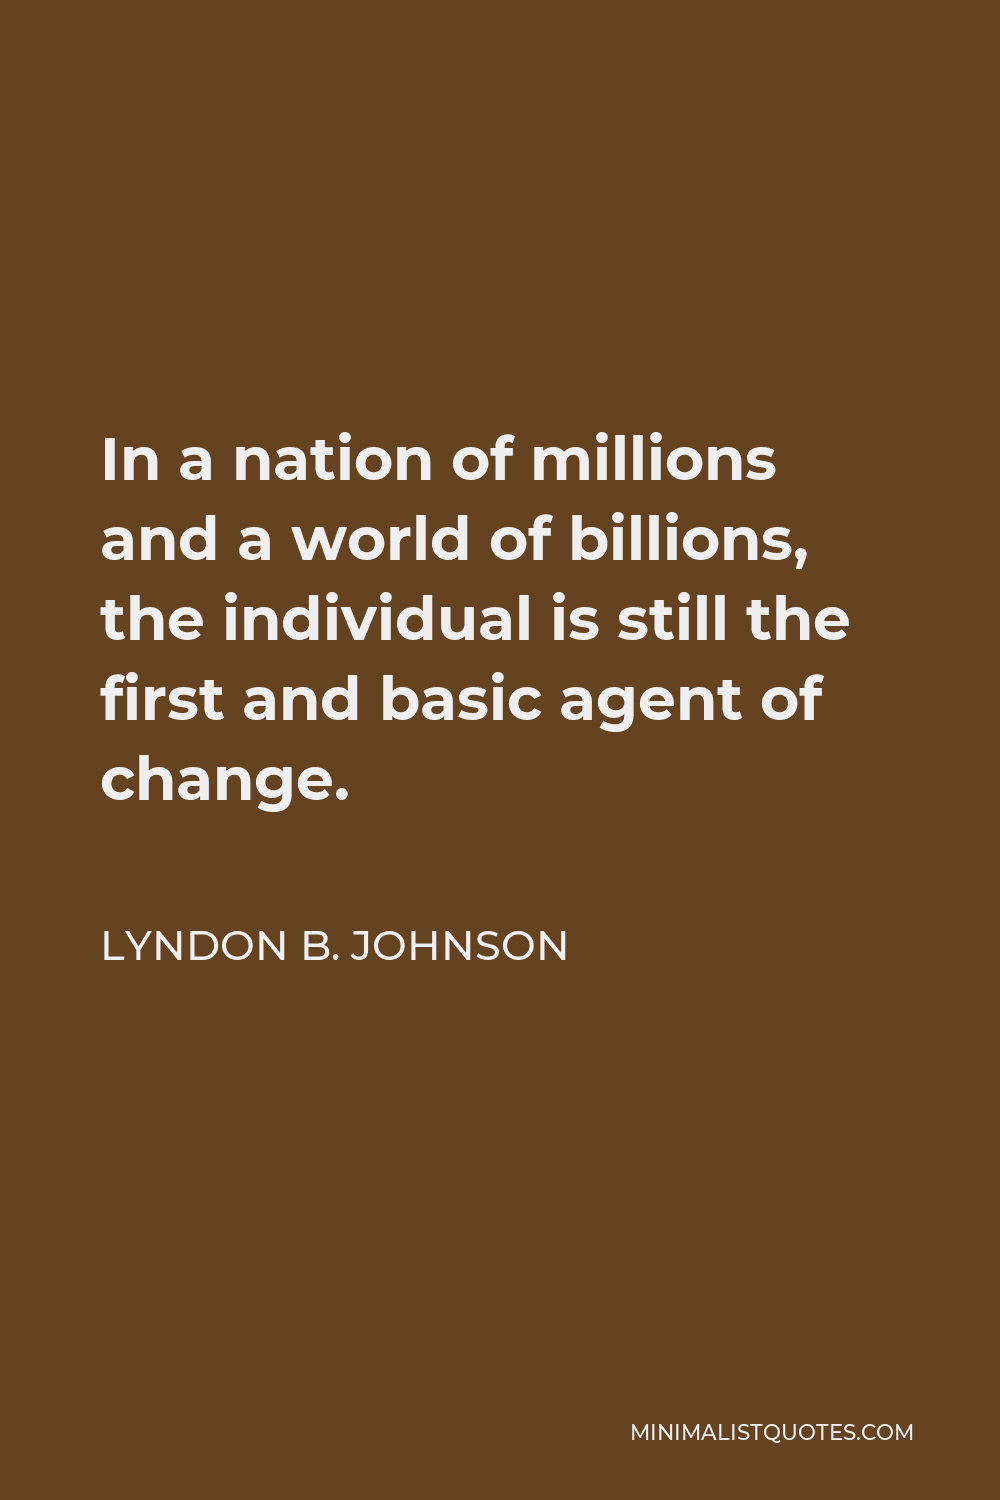 Lyndon B. Johnson Quote - In a nation of millions and a world of billions, the individual is still the first and basic agent of change.